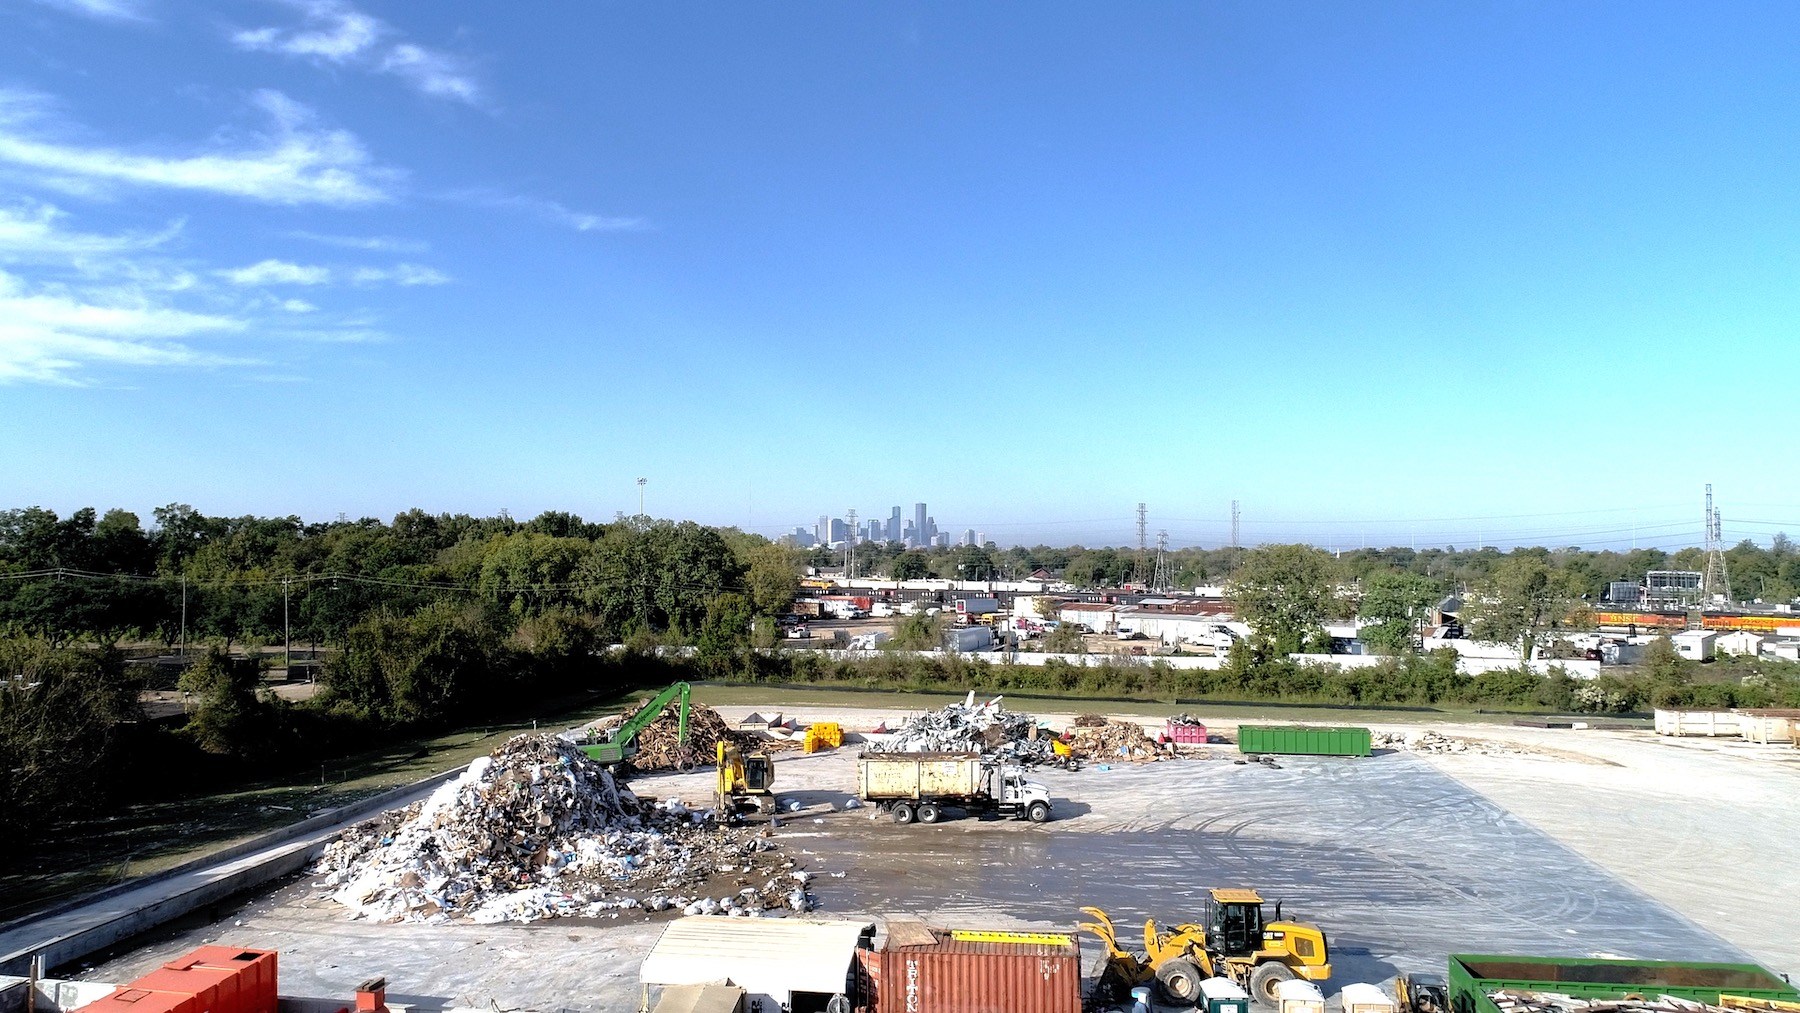 Trucks working at the Houston dump with the Houston skyline in the background.